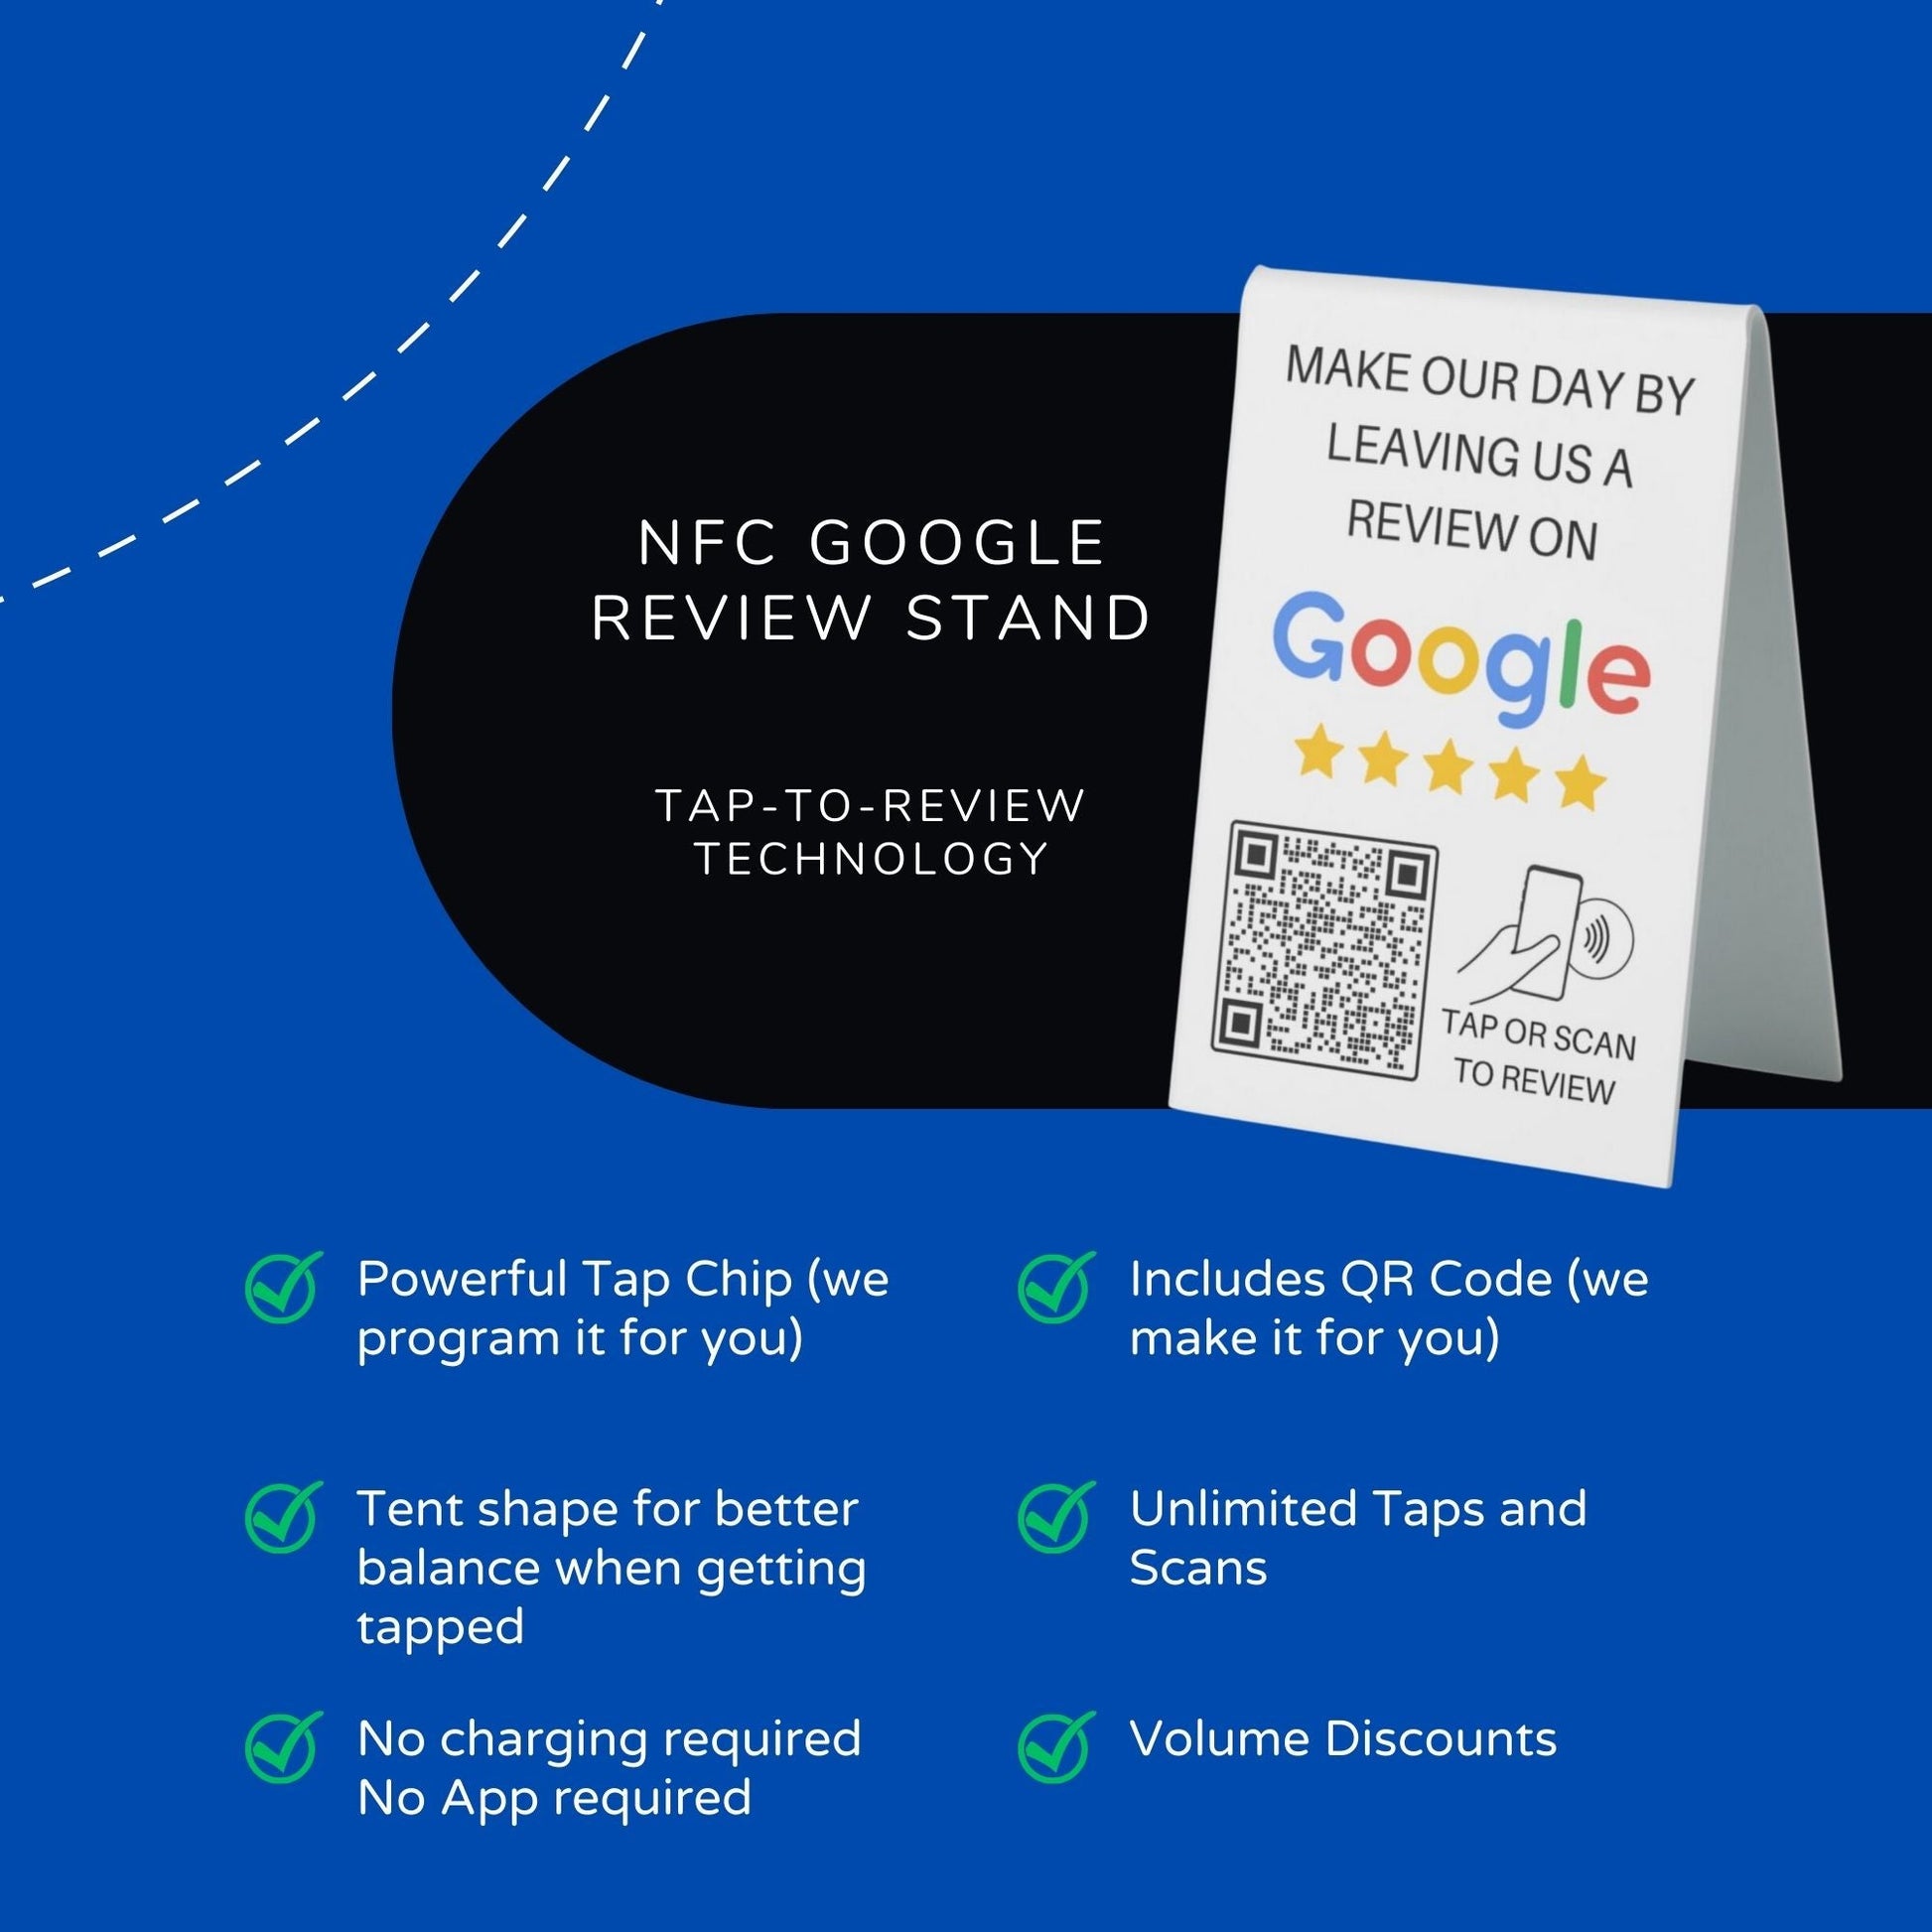 NFC Google Review Sign